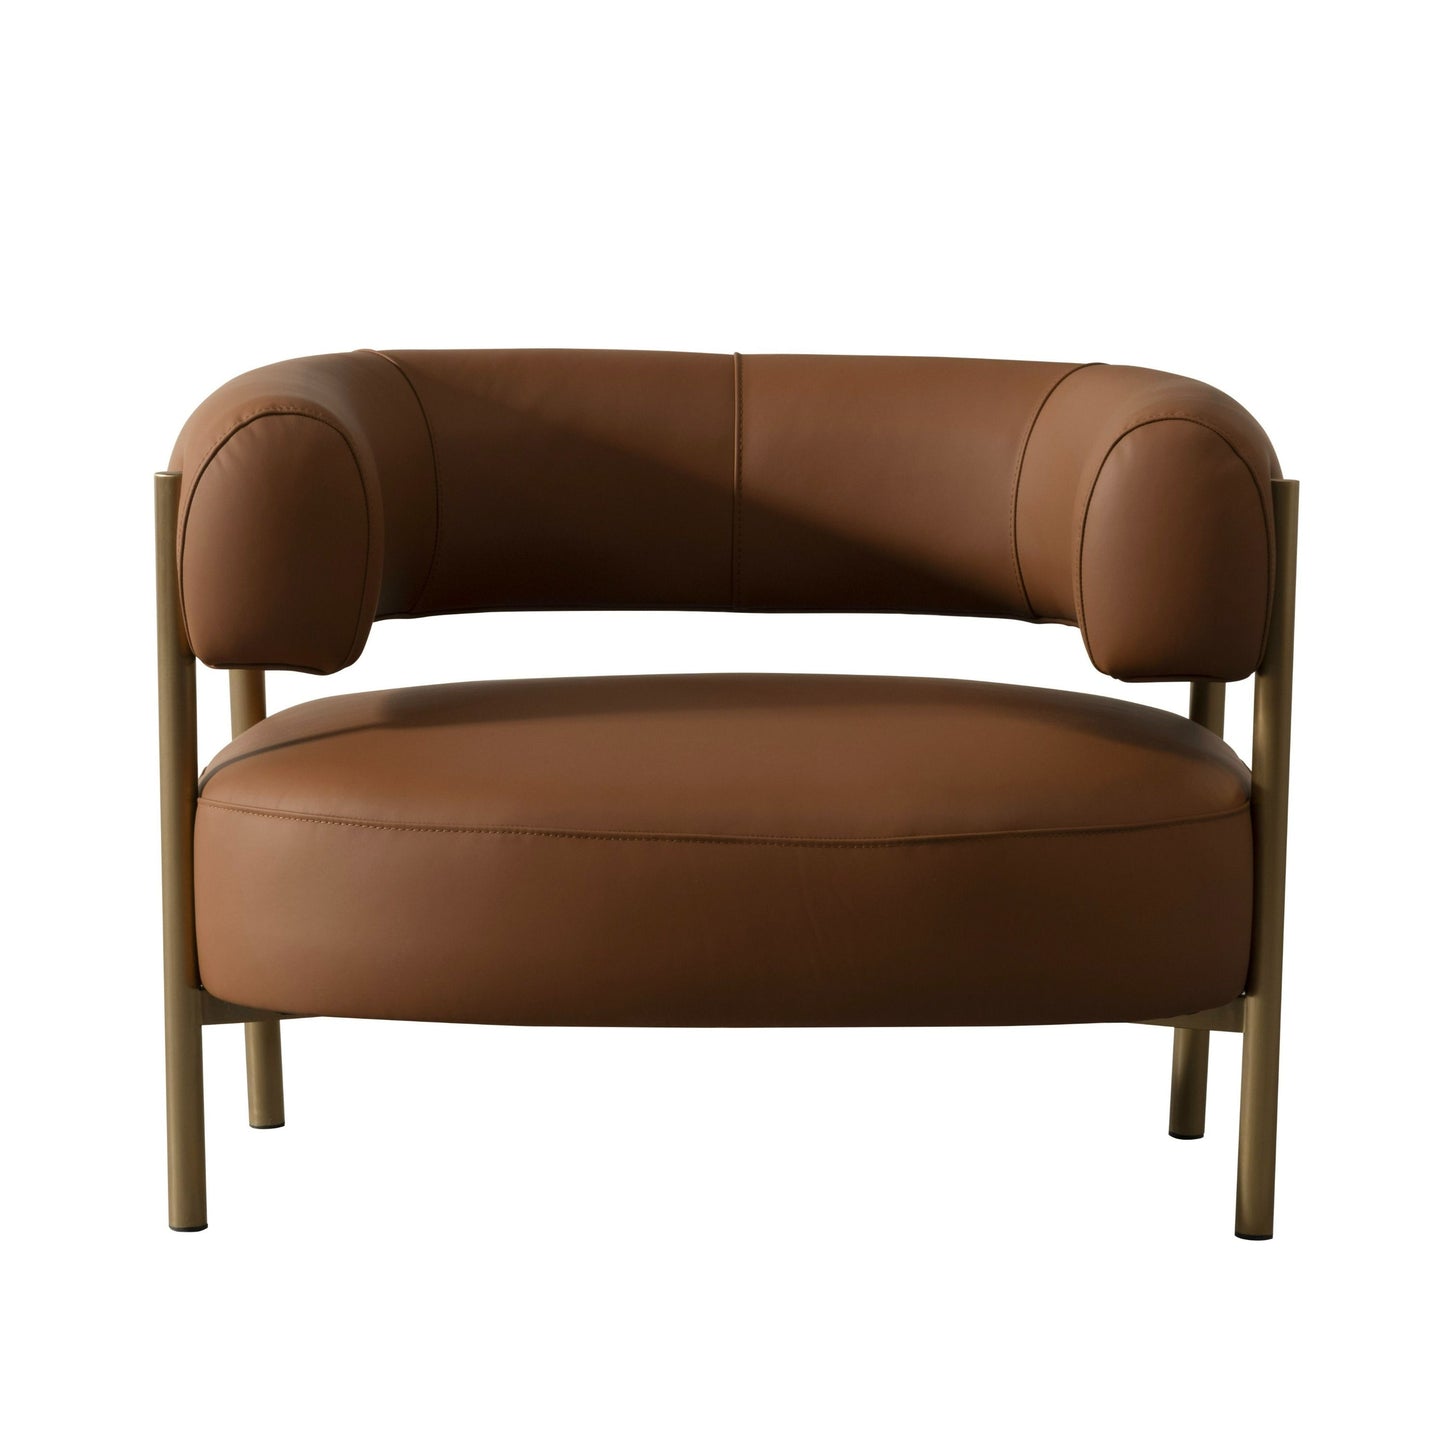 Modrest Ozona - Modern Rust Leather Accent Chair